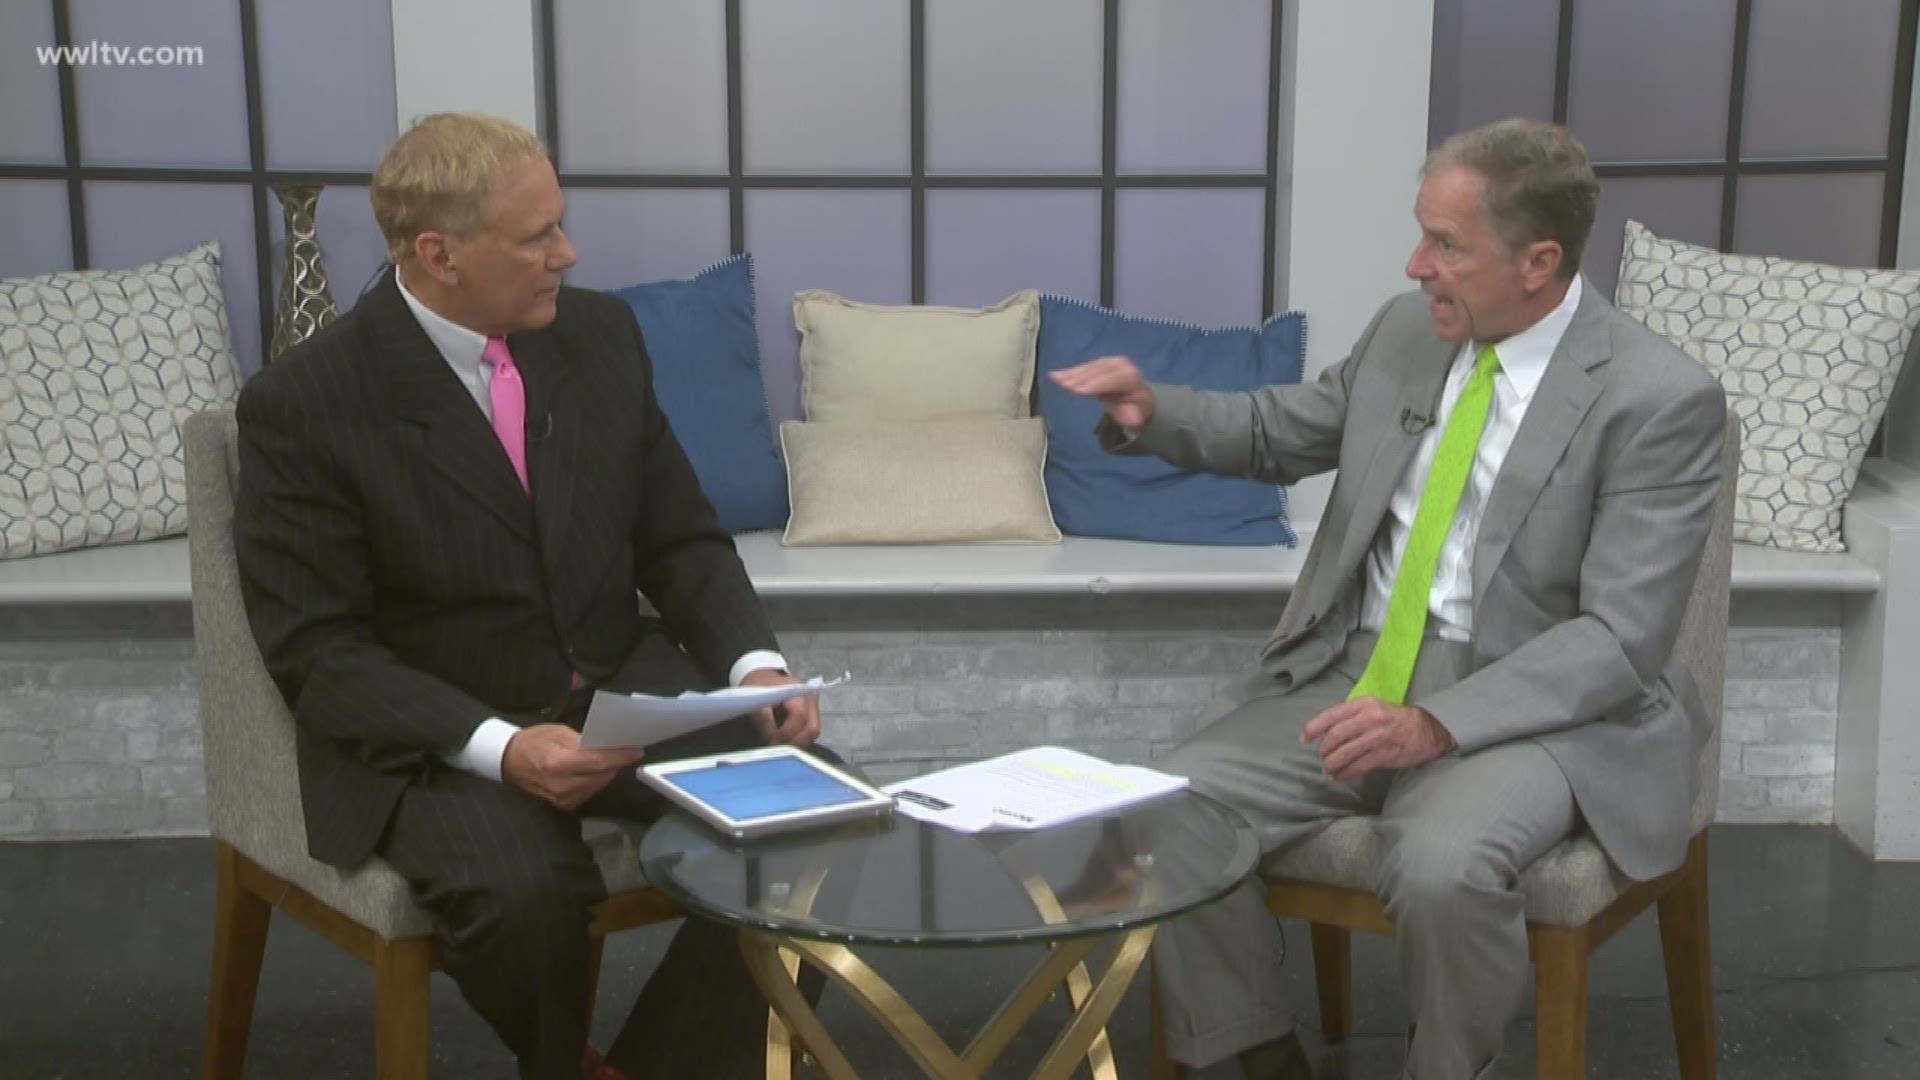 Financial Expert Randy Waesche sits down with Eric to breakdown the numbers for the presidents new tax plan and how it will effect the country.